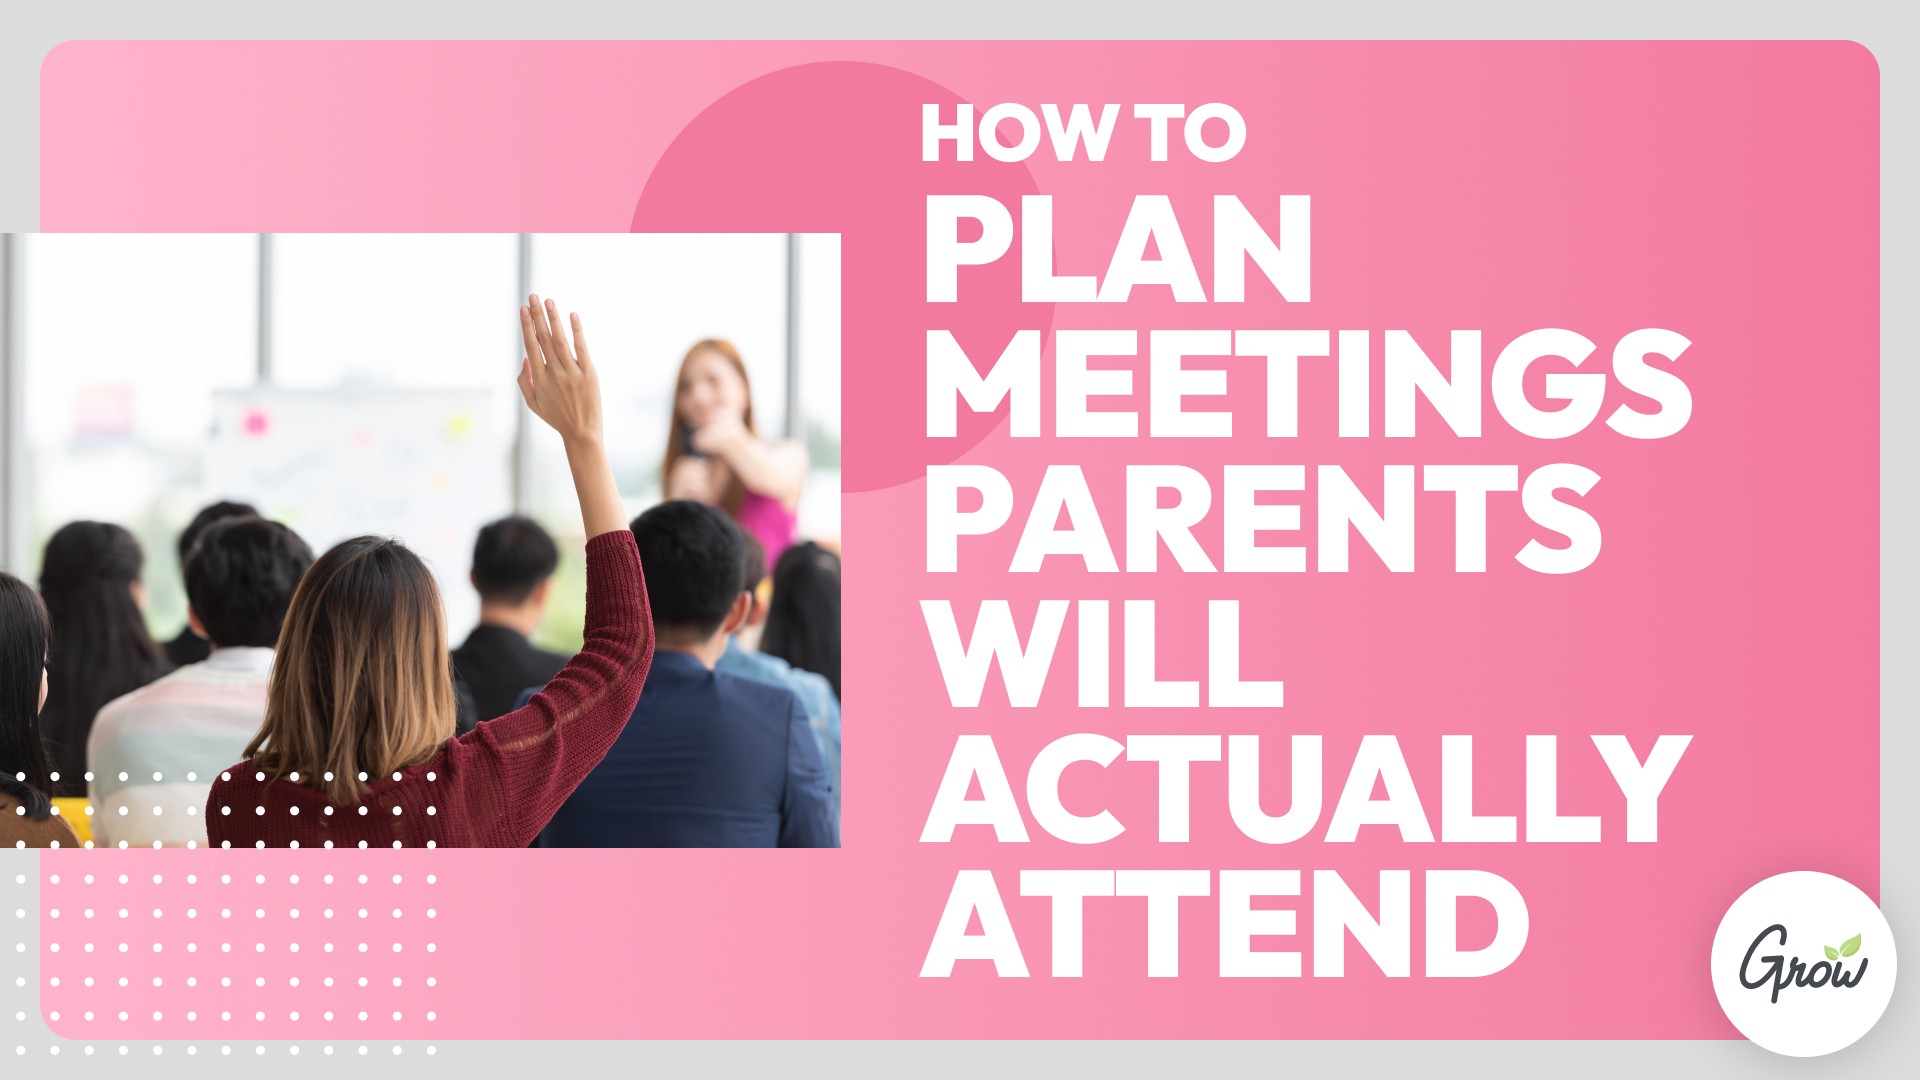 How to Plan Meetings Parents Will Actually Attend